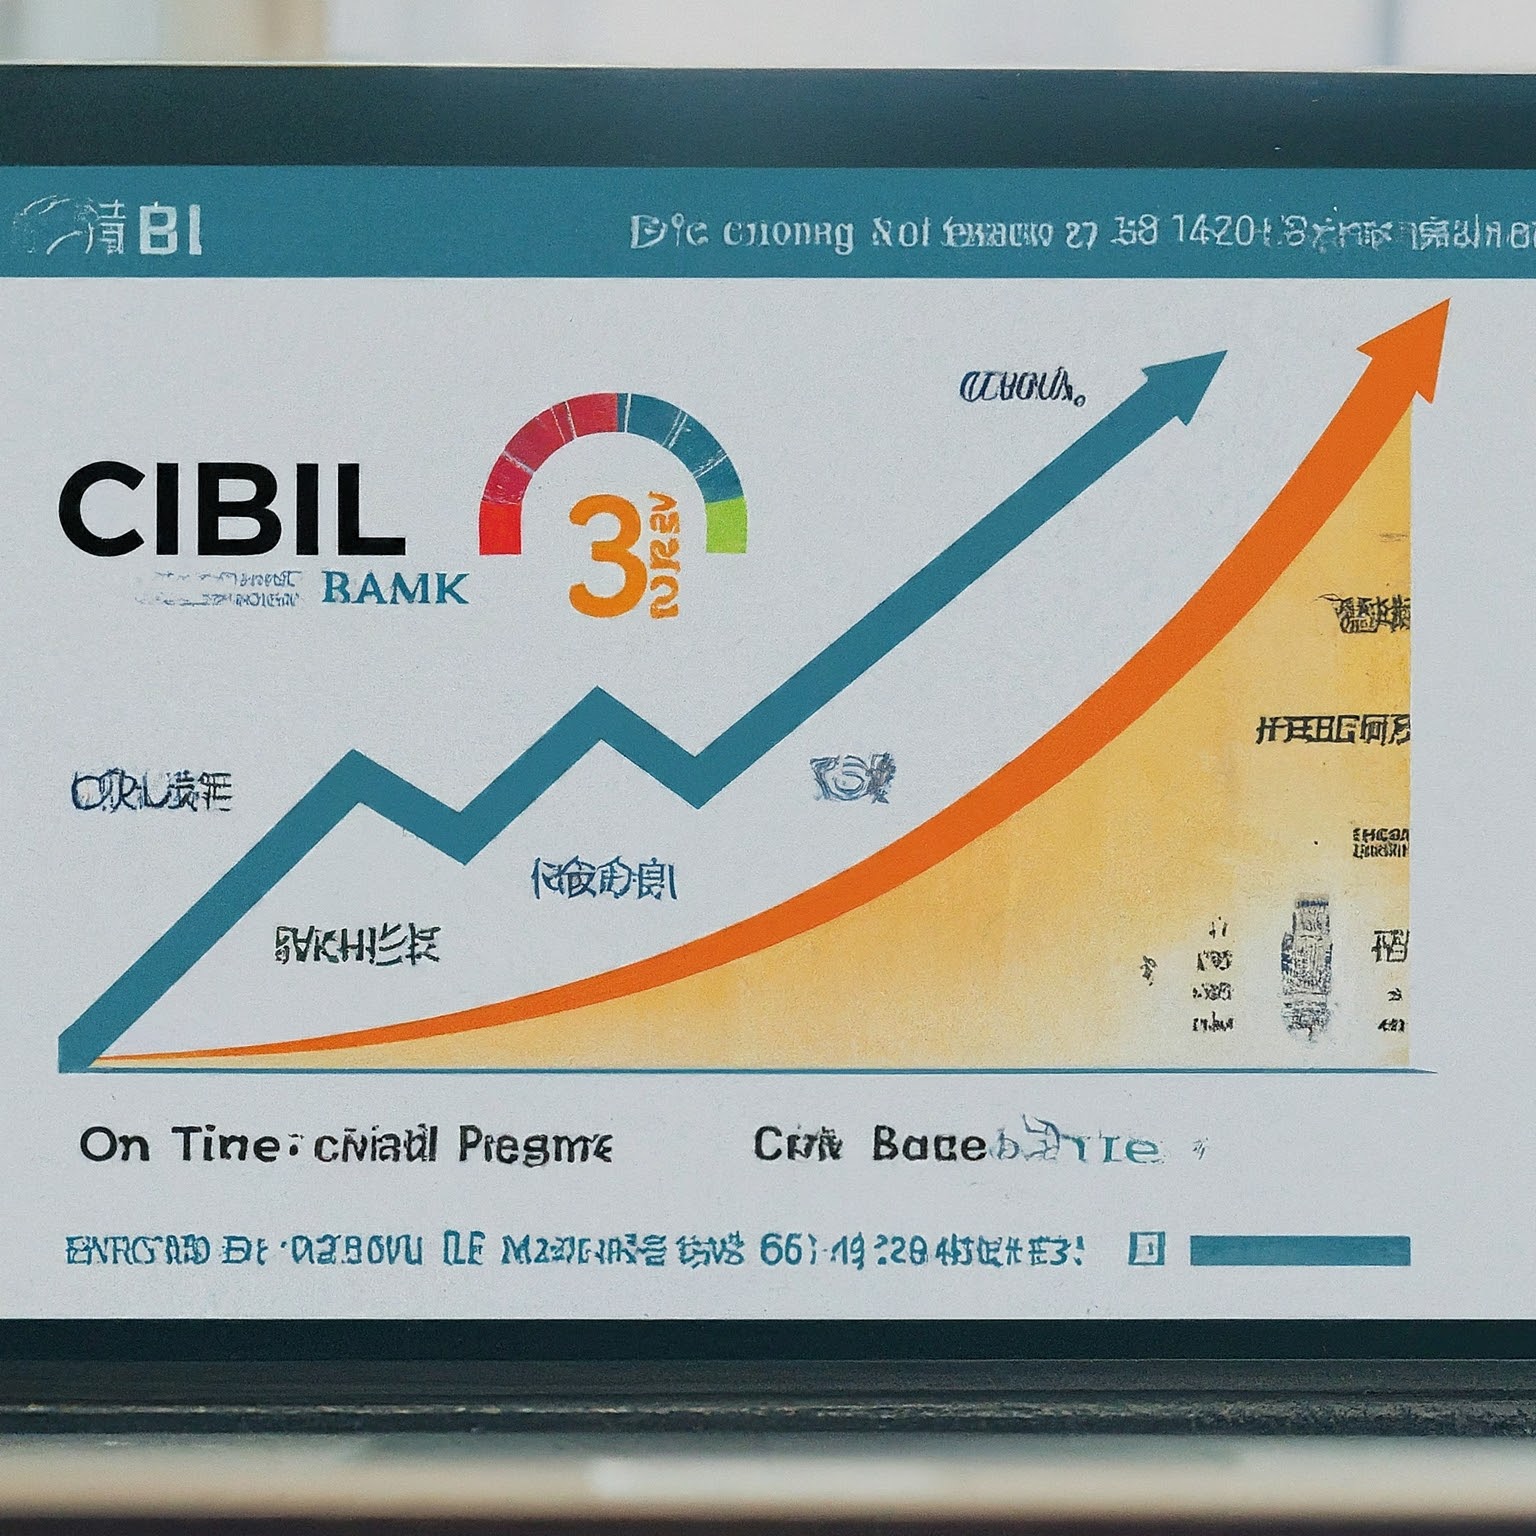 Understanding Your Credit Health: A Guide to CIBIL MSME Rank